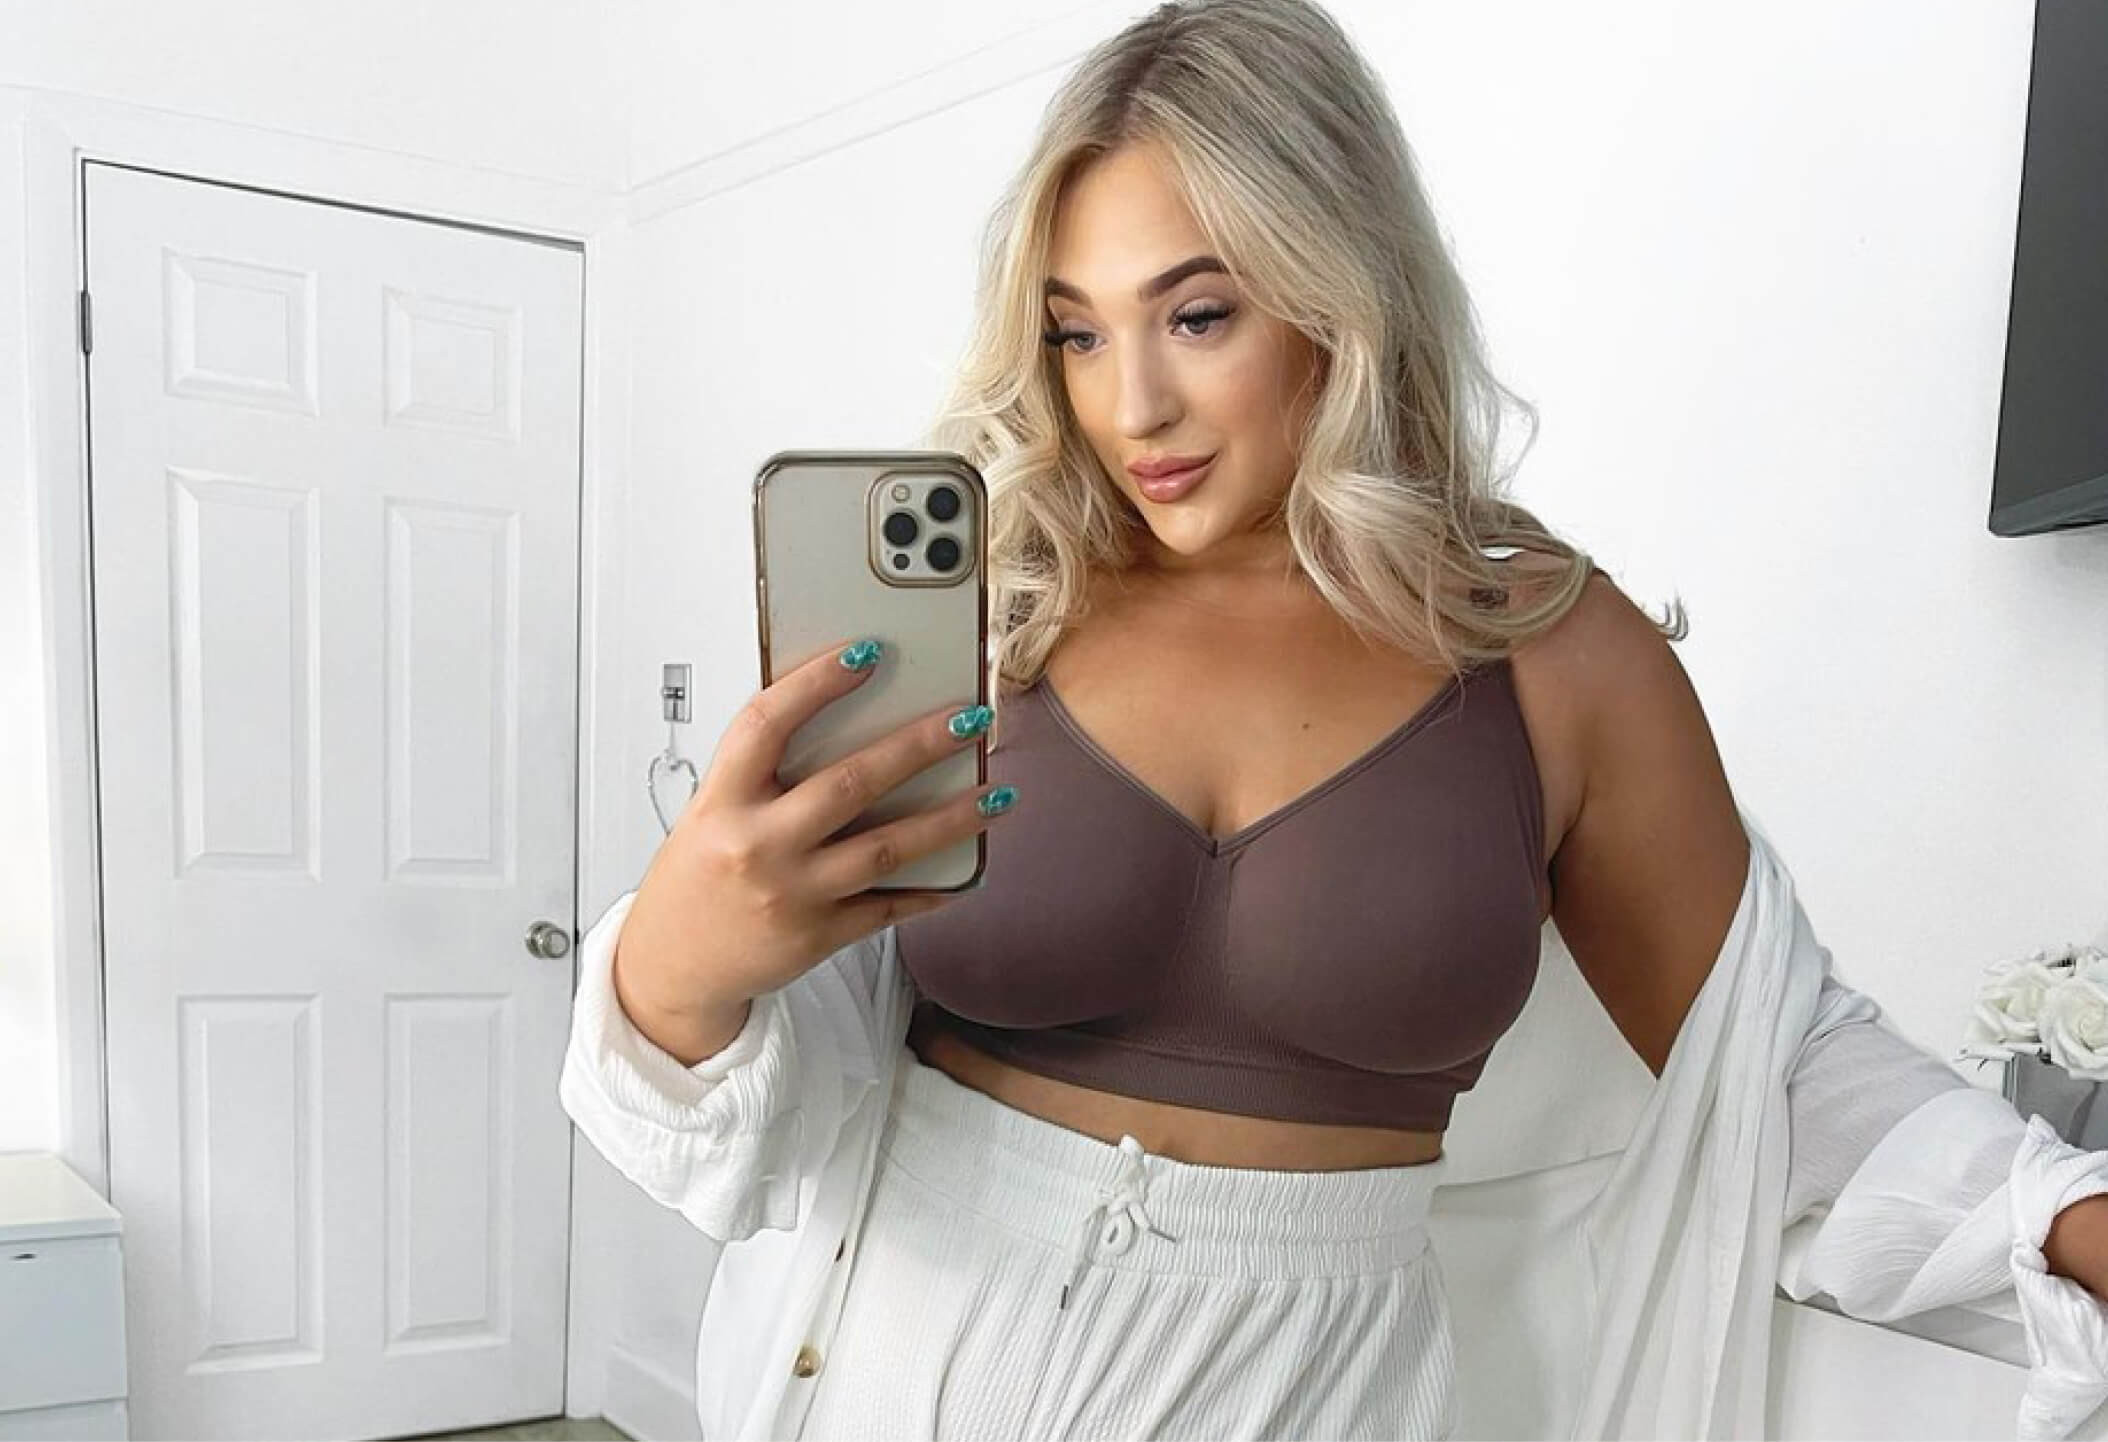 I'm 5'1'' with a 36DDD-cup - my boobs take up a lot of my body, but my 'hot  girl outfits' look great for a bigger bust